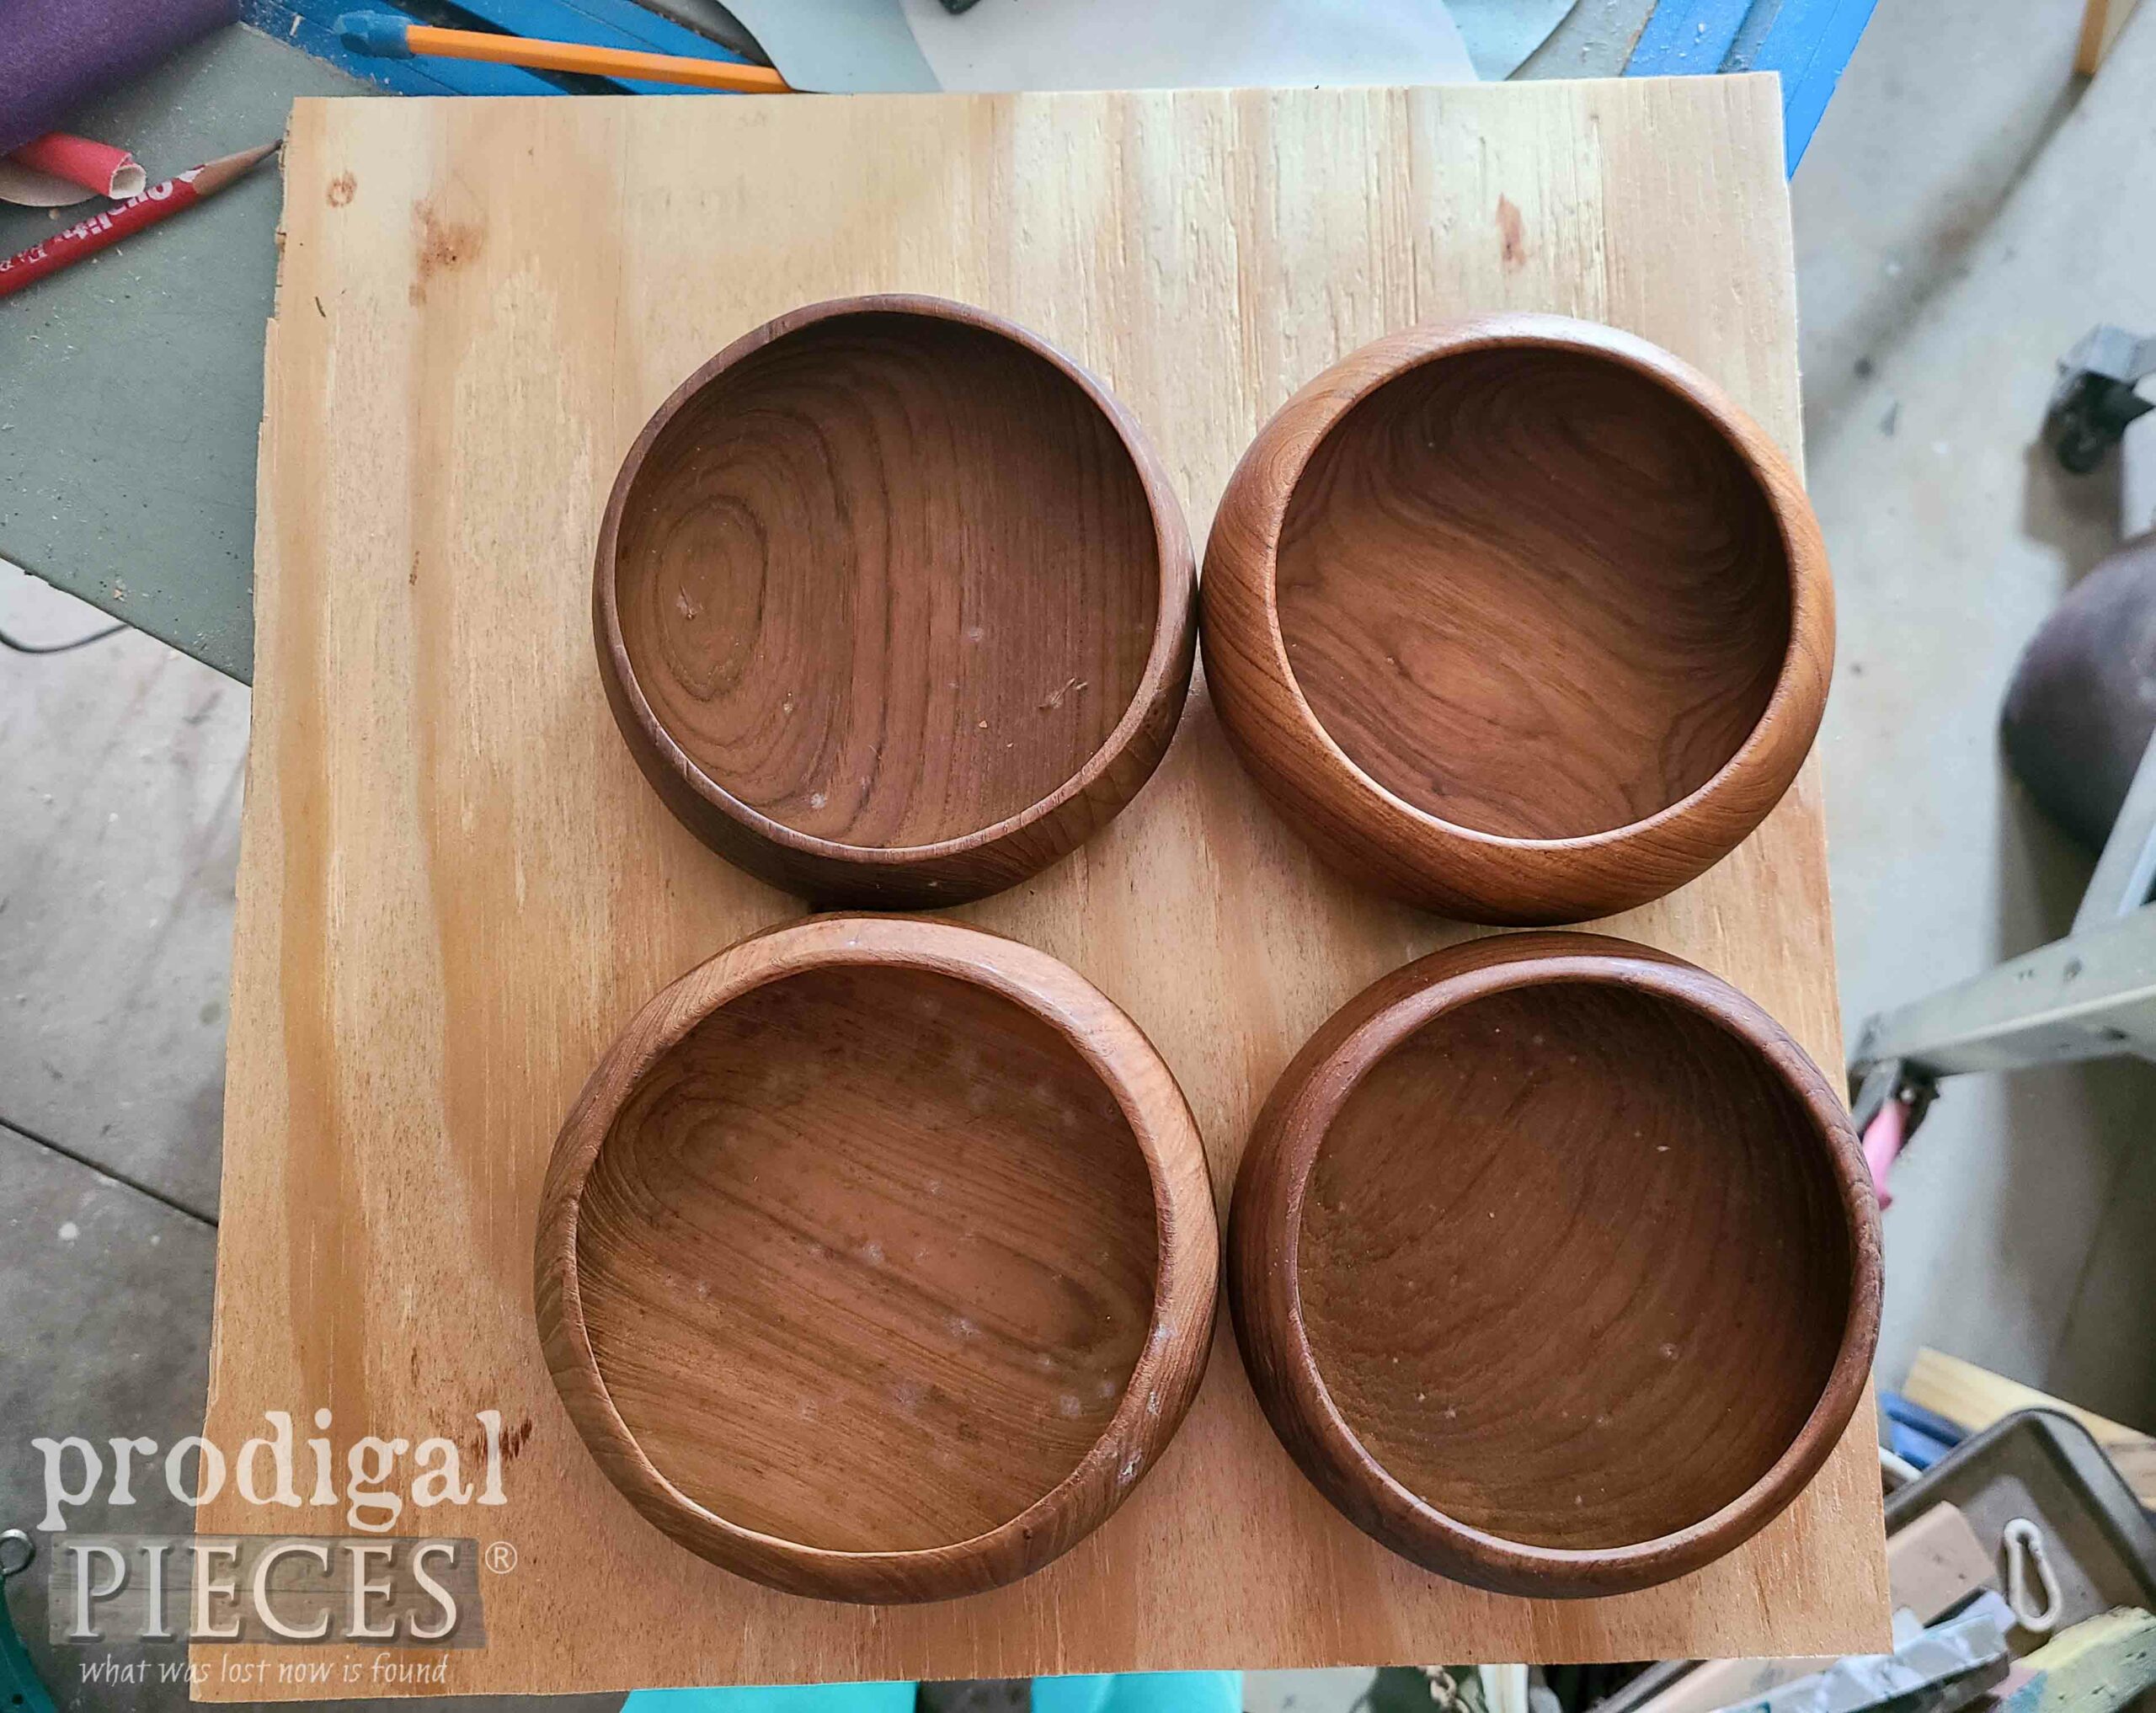 Dry Fit of Upcycled Salad Bowls for Dog Toy | prodigalpieces.com #prodigalpieces